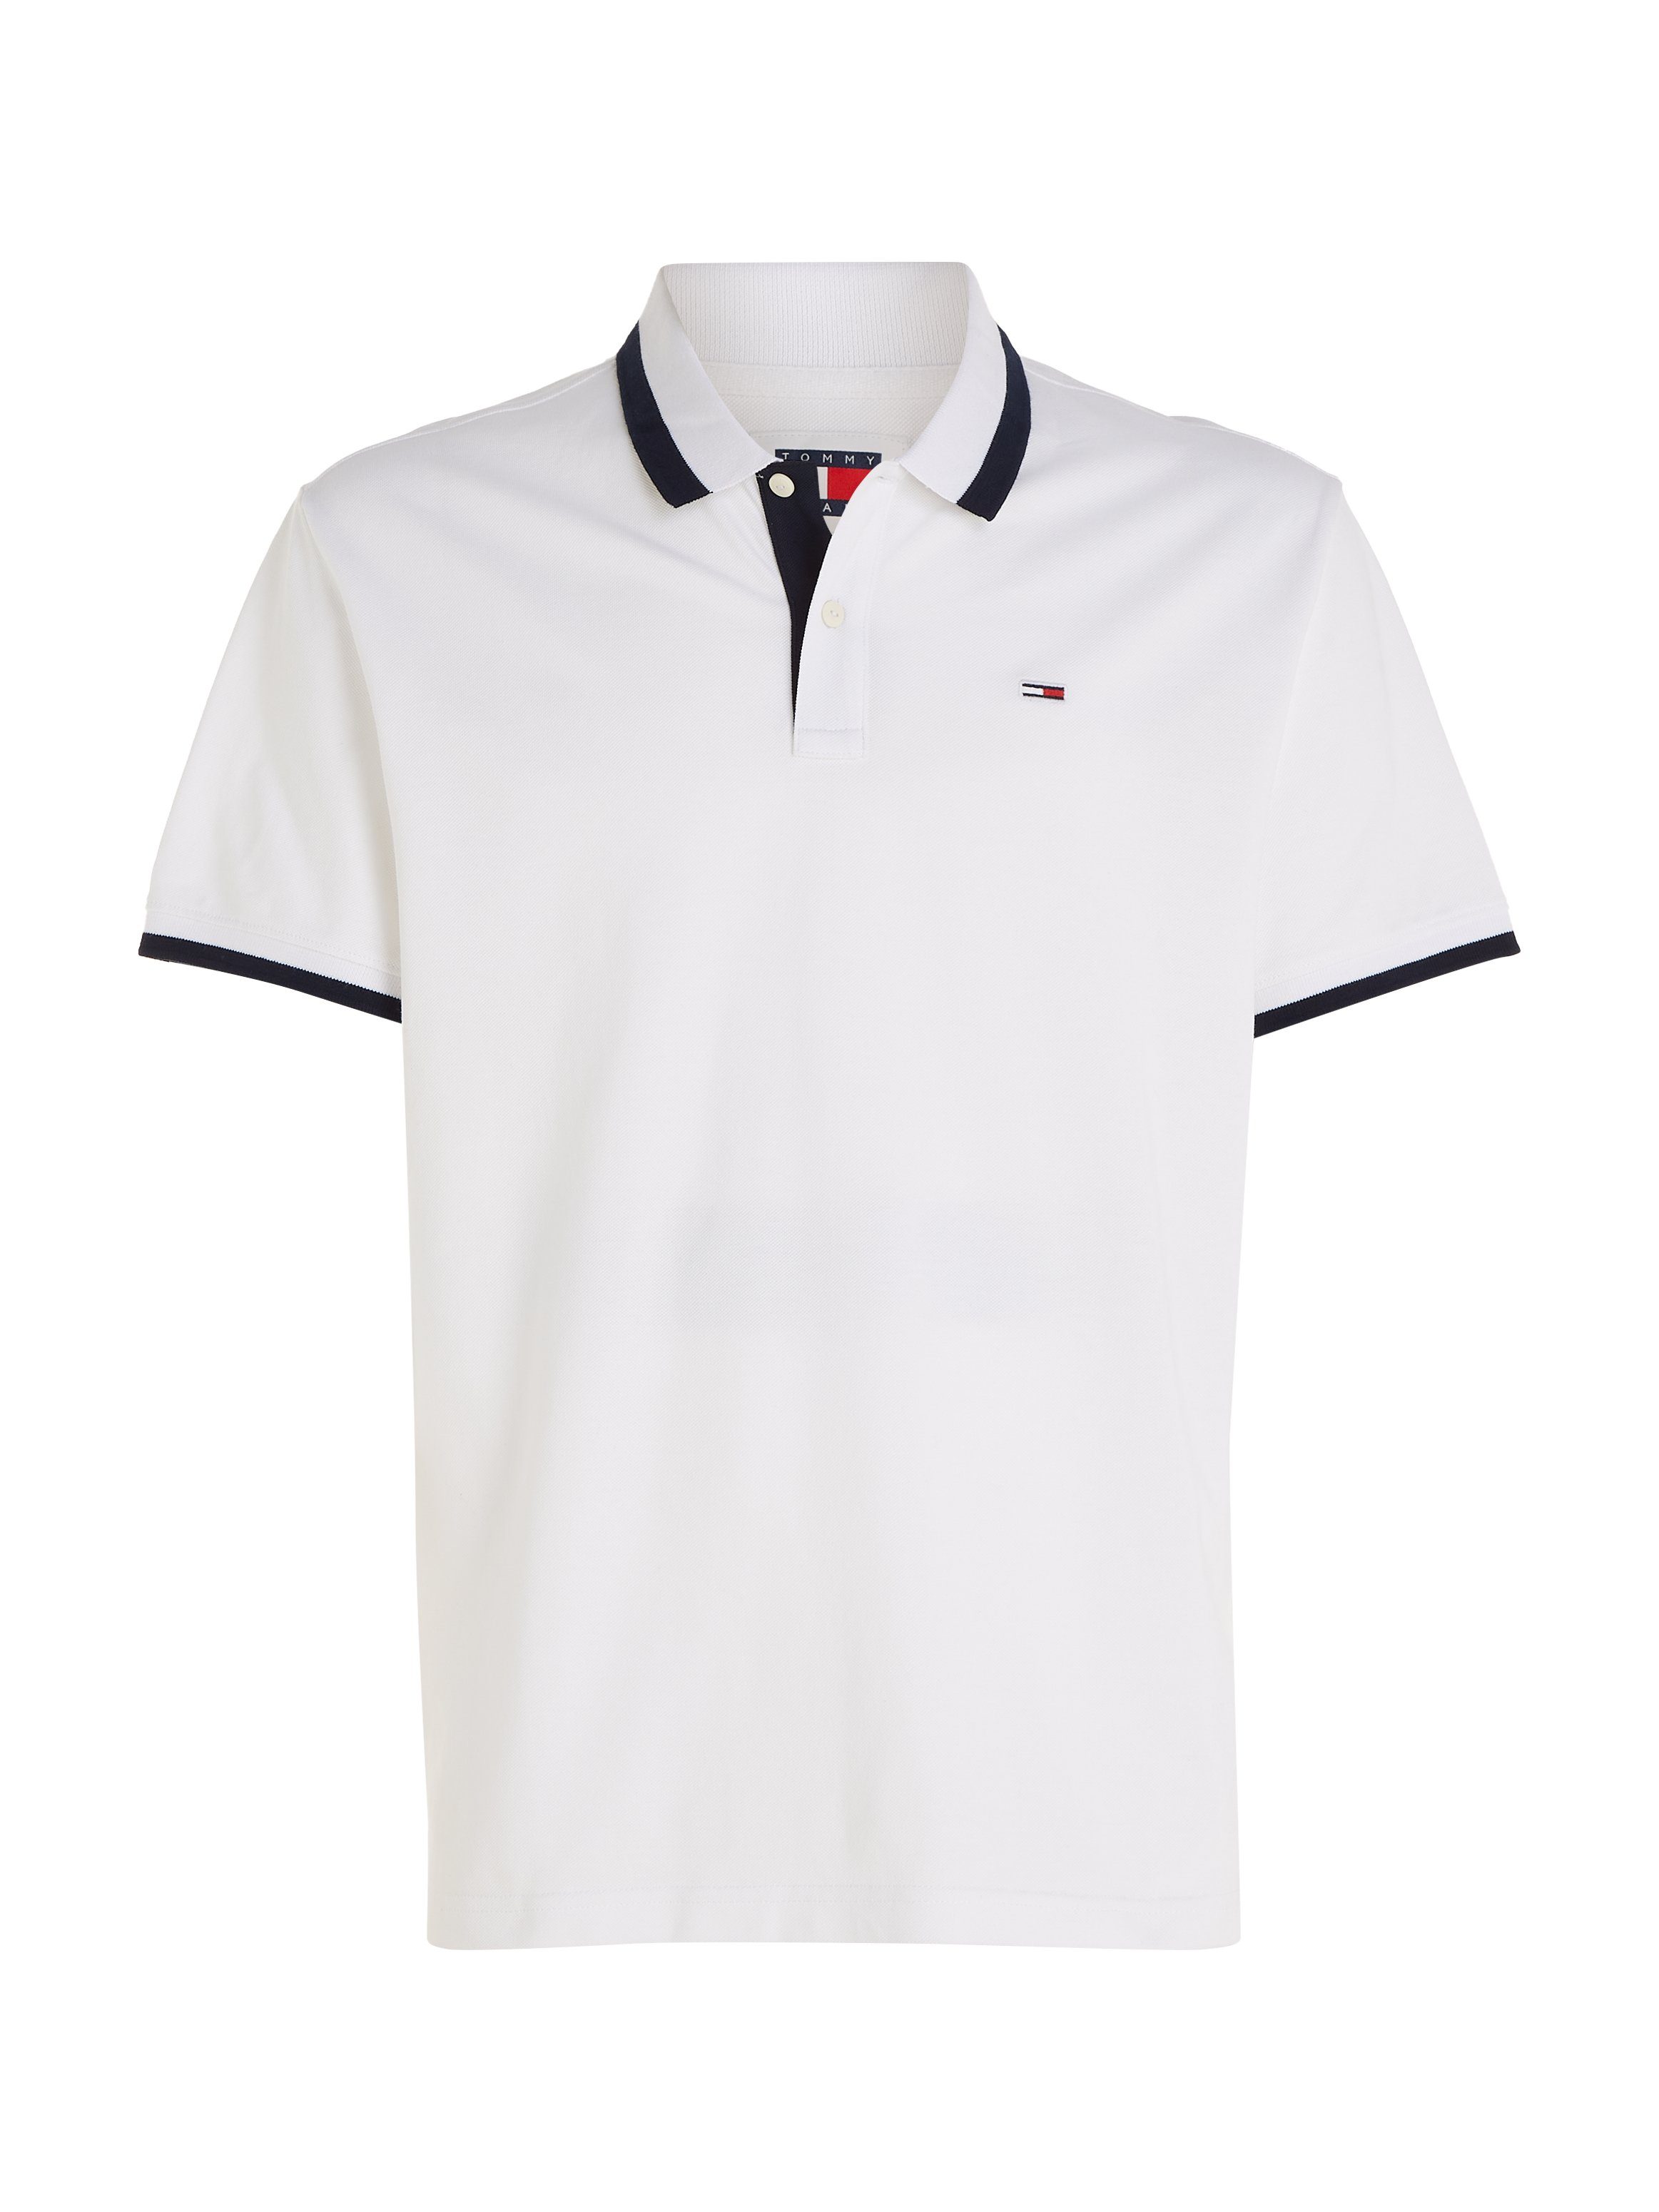 REG mit TJM TIPPED White Polokragen Tommy POLO Poloshirt SOLID Jeans